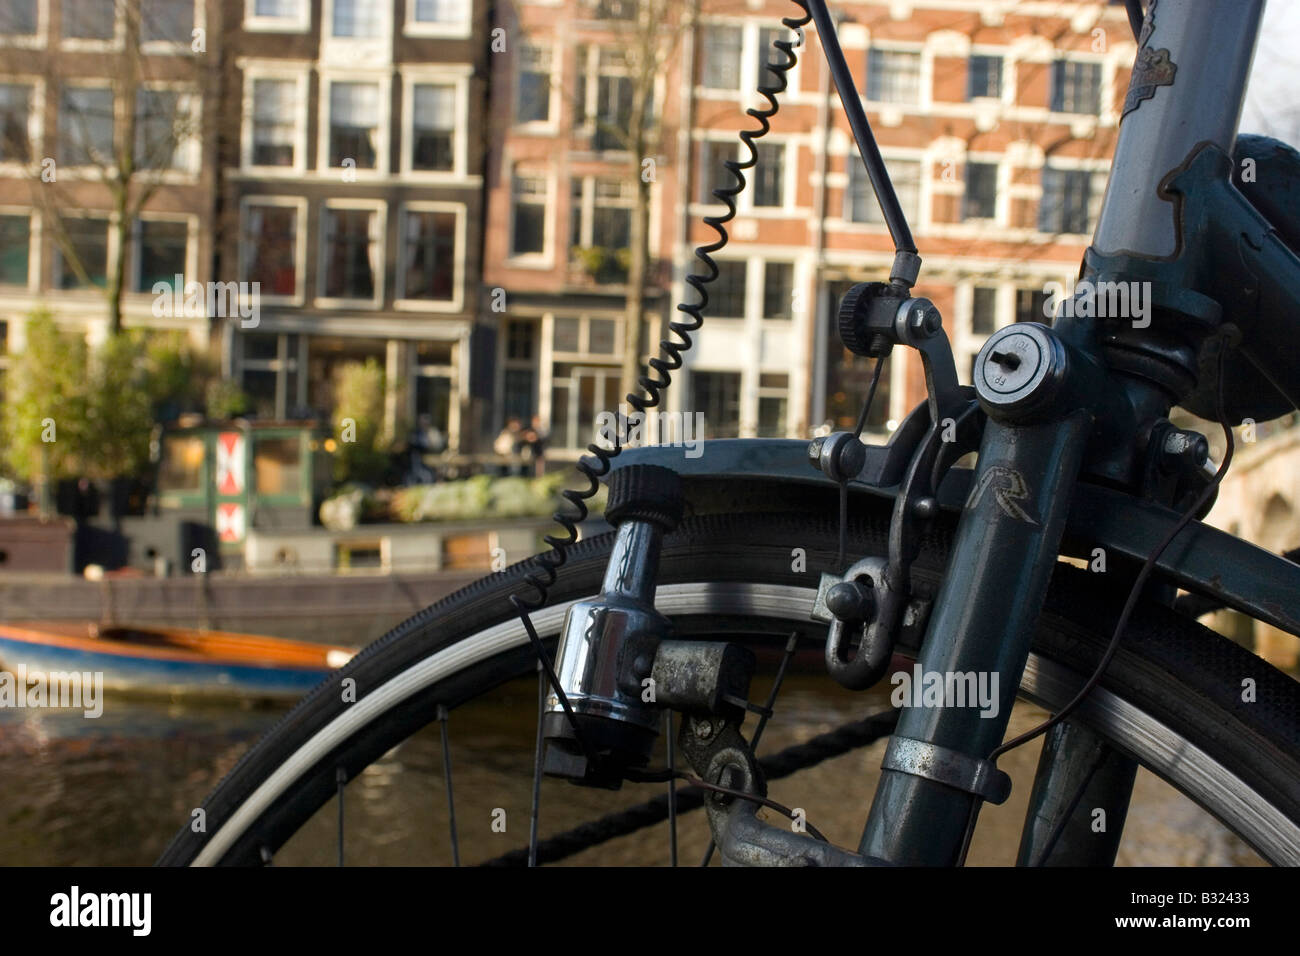 Bicycle beside the canal, Amsterdam Stock Photo